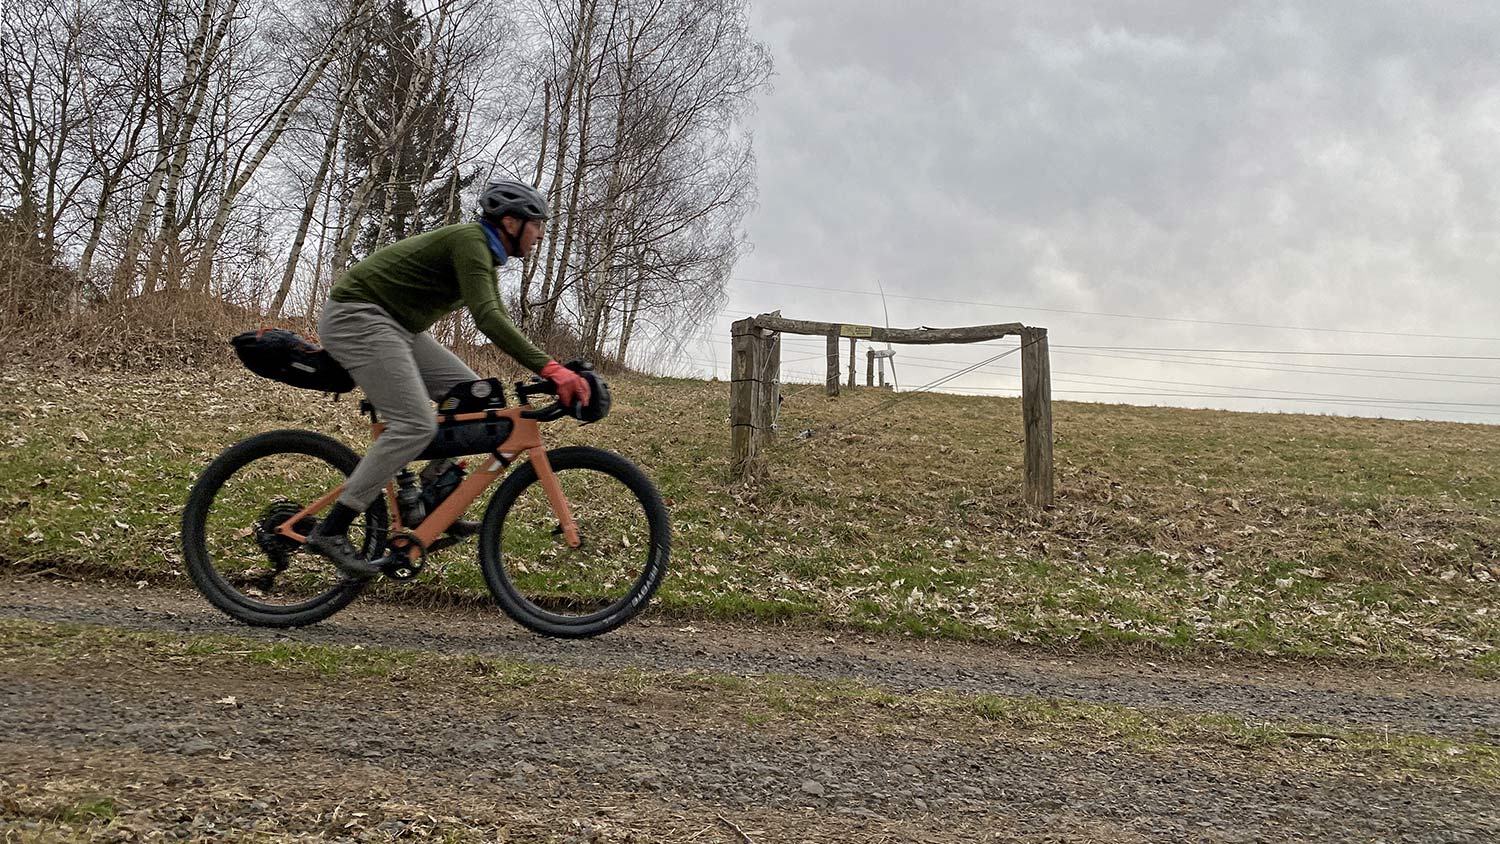 2022 3T Exploro Ultra carbon adventure gravel bike first rides review, bikepacking